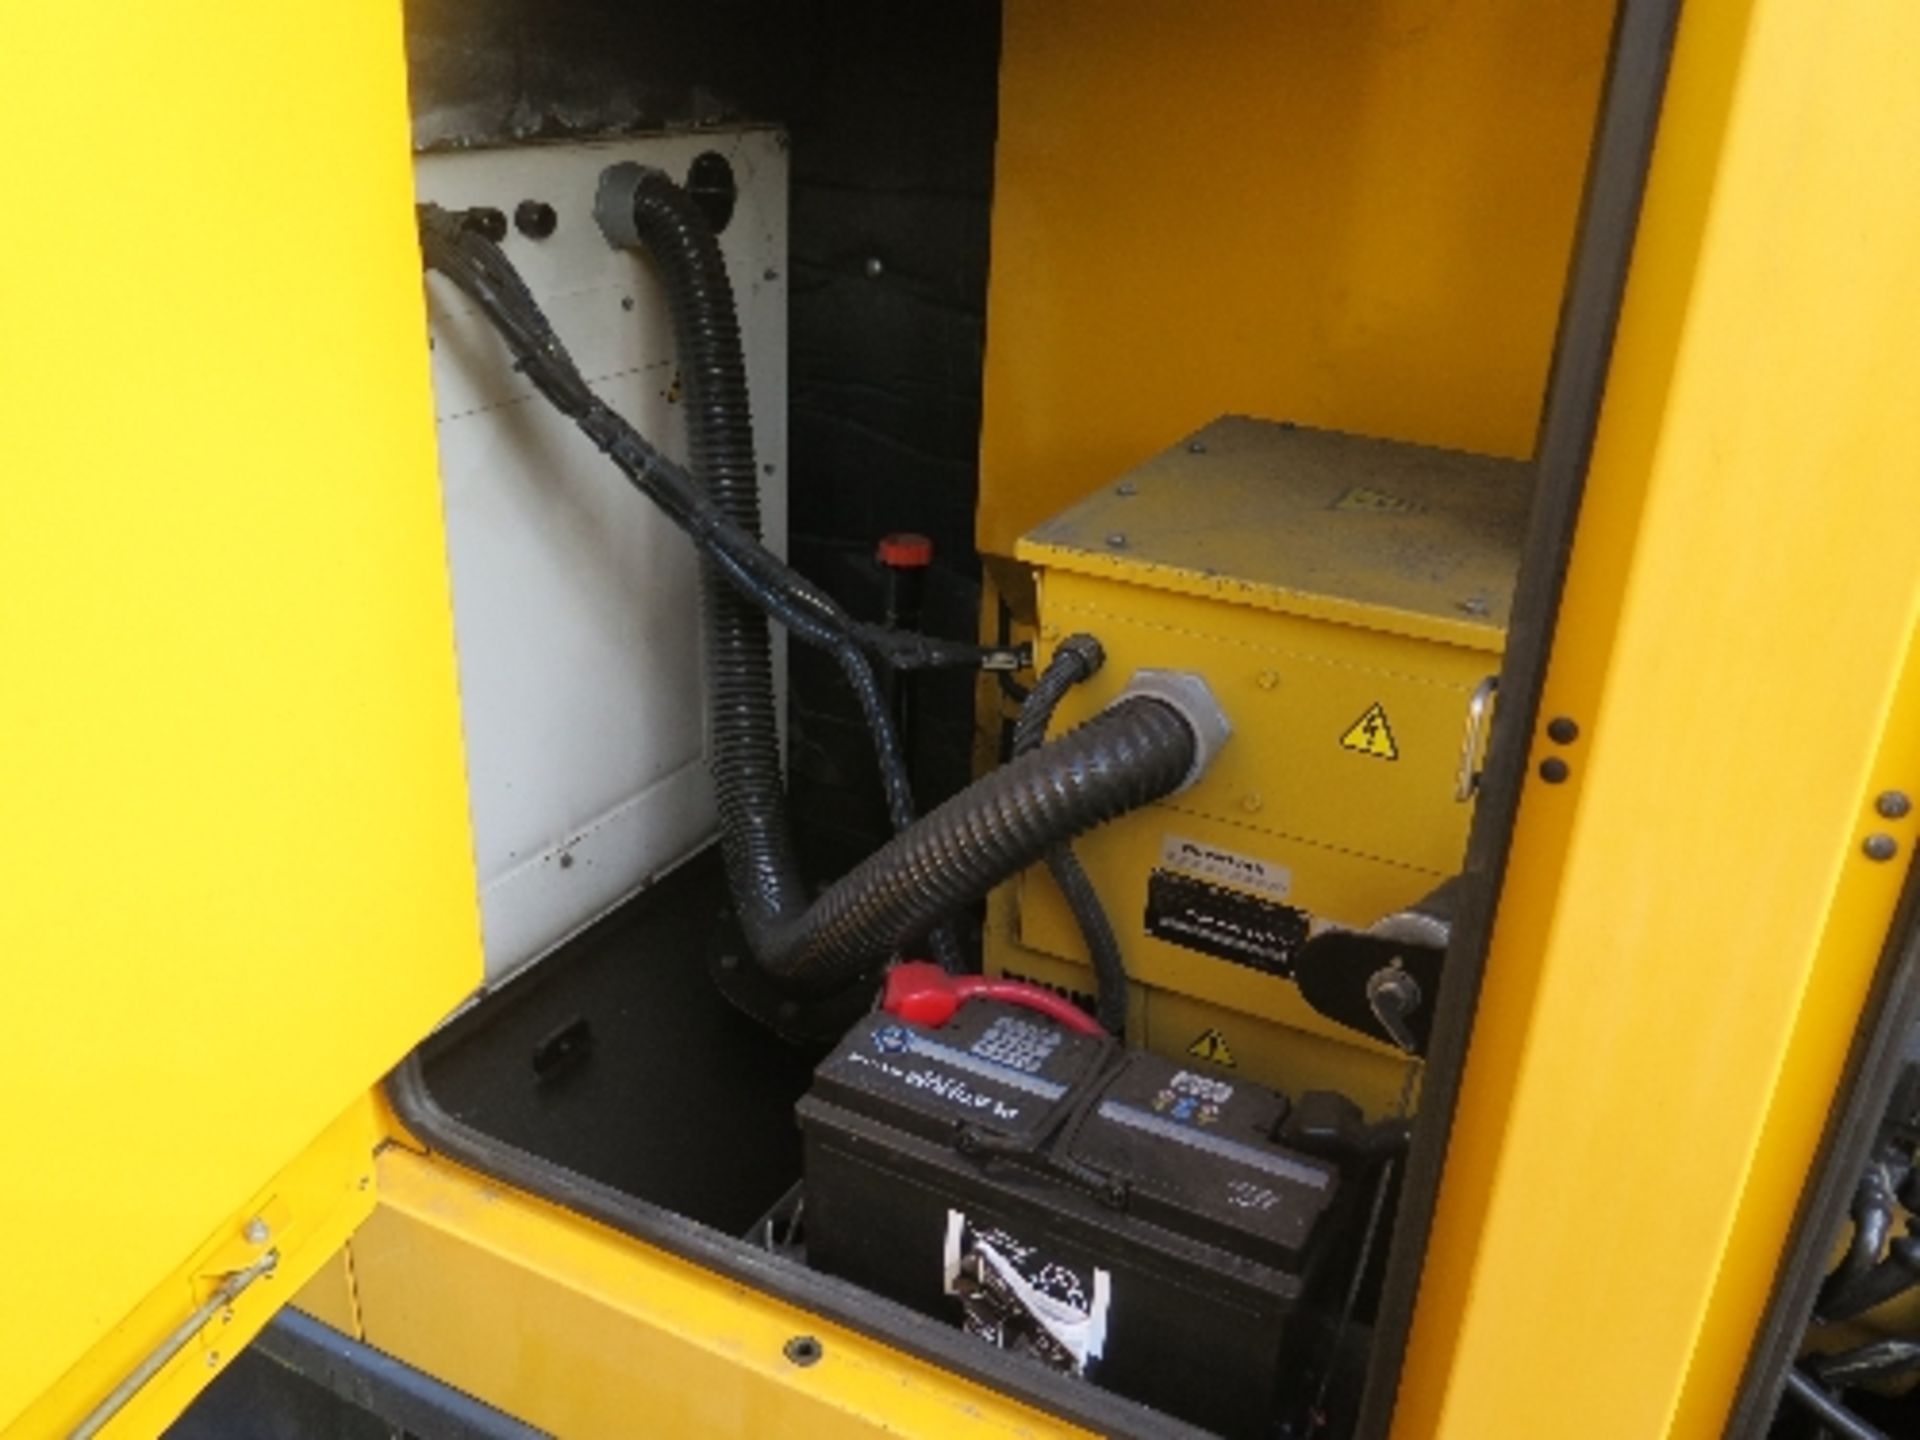 Caterpillar XQE45 generator 21460 hrs 157790
PERKINS - RUNS AND MAKES POWER
ALL LOTS are SOLD AS - Image 6 of 6